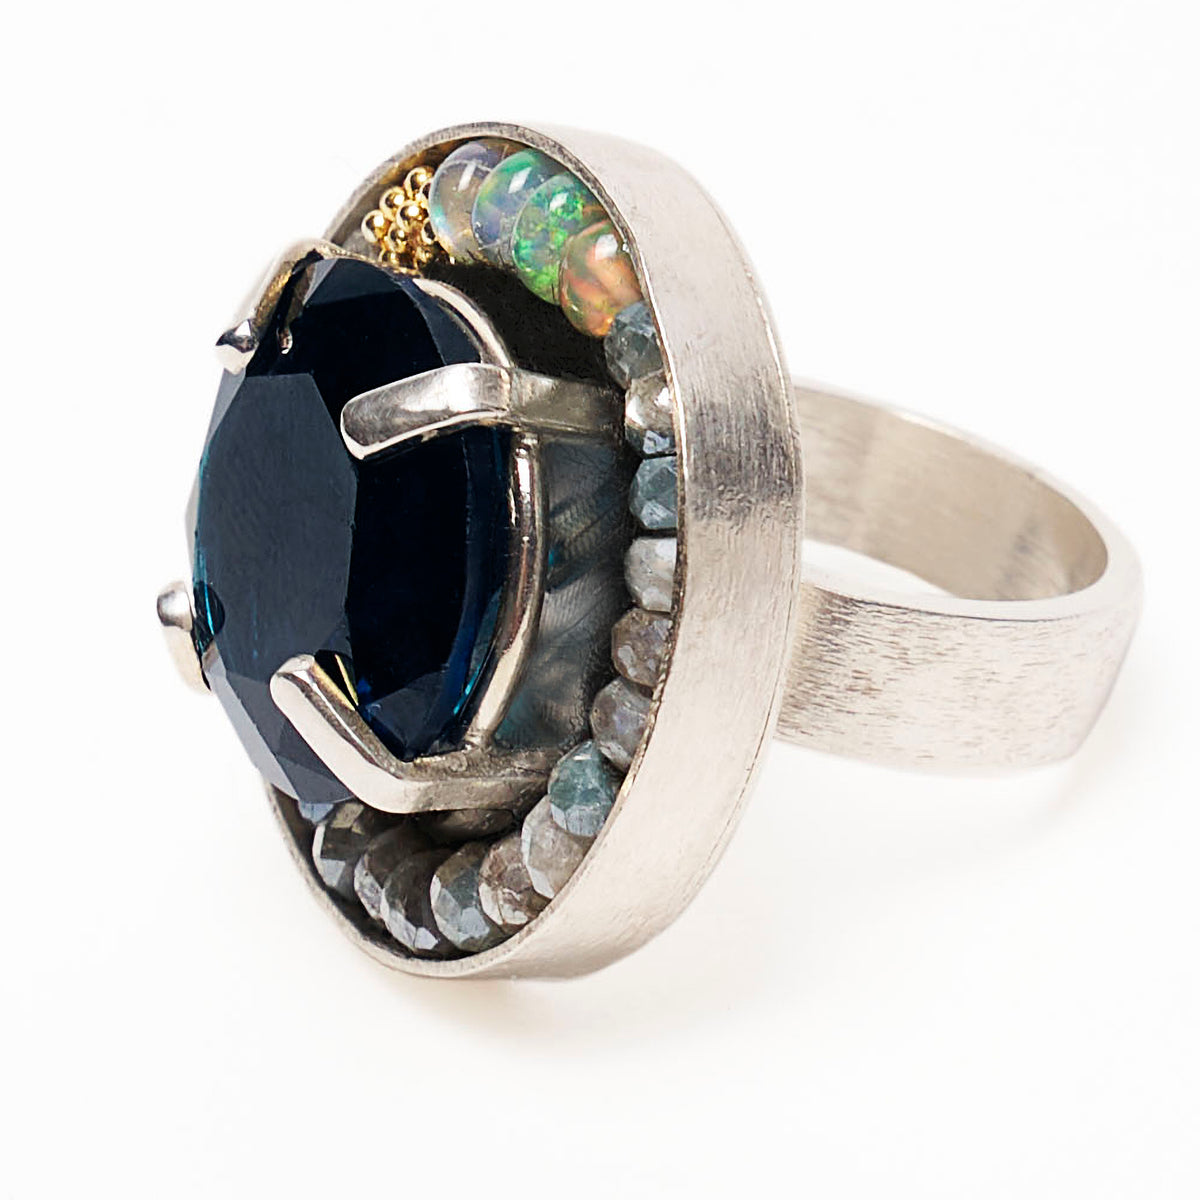 London Blue Topaz, Opals, and Gold mosaic ring